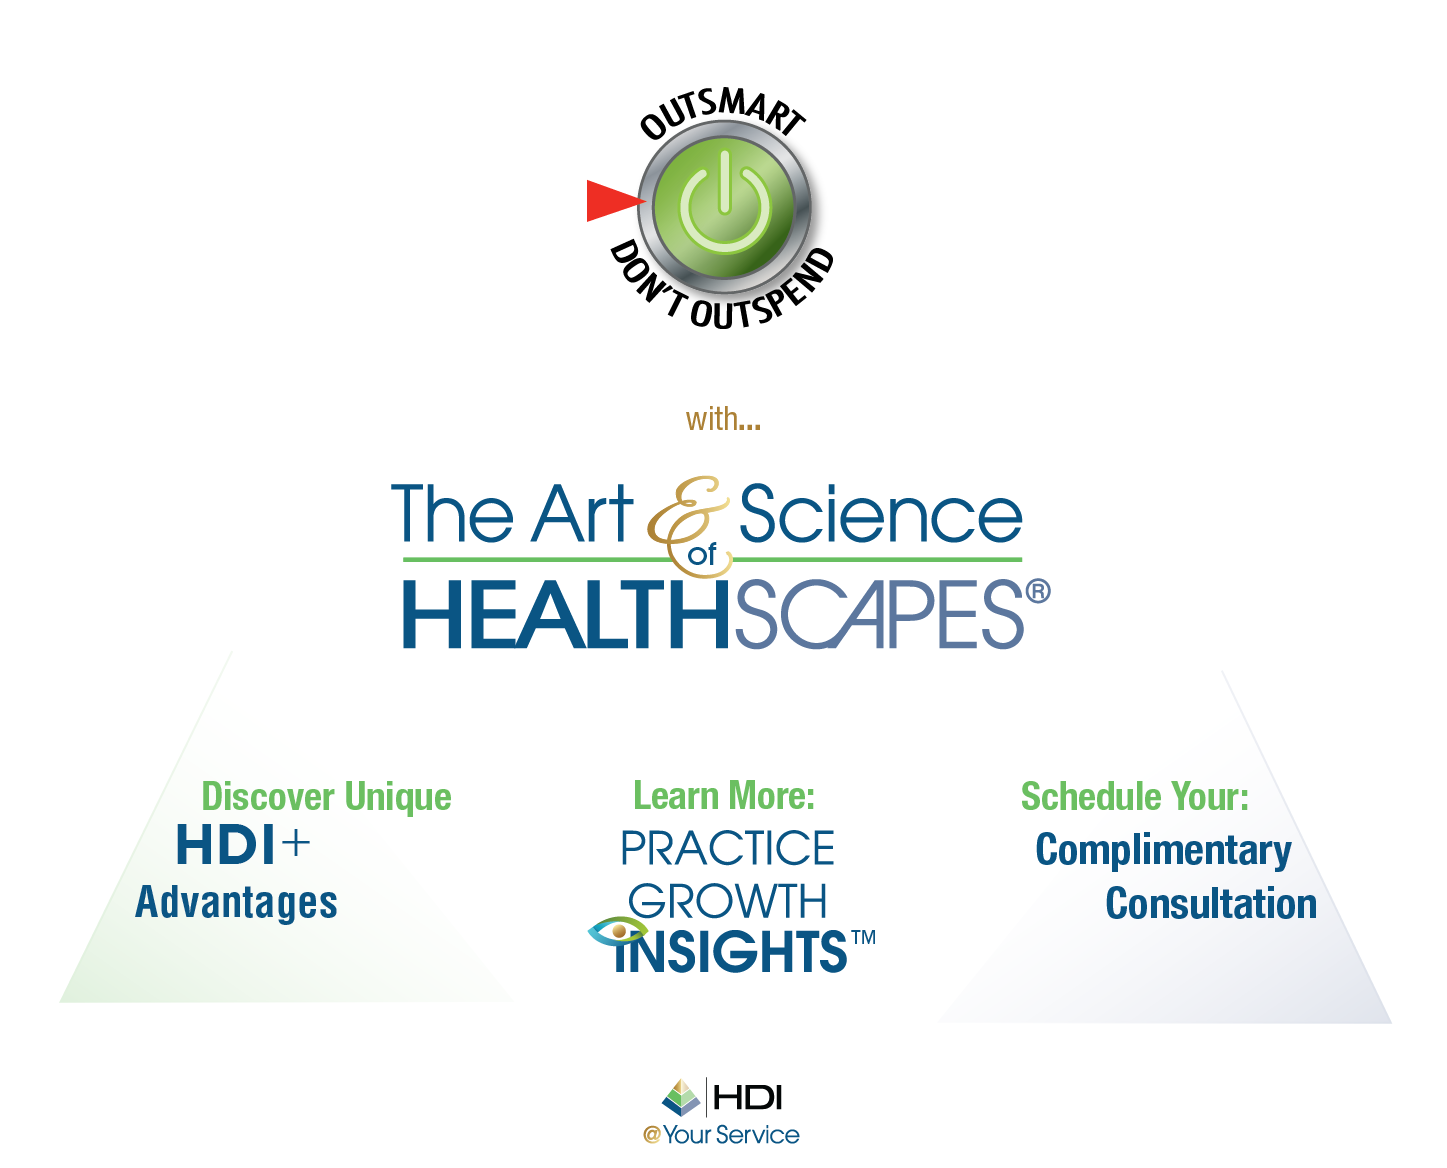 The Art & Science of Healthscapes®